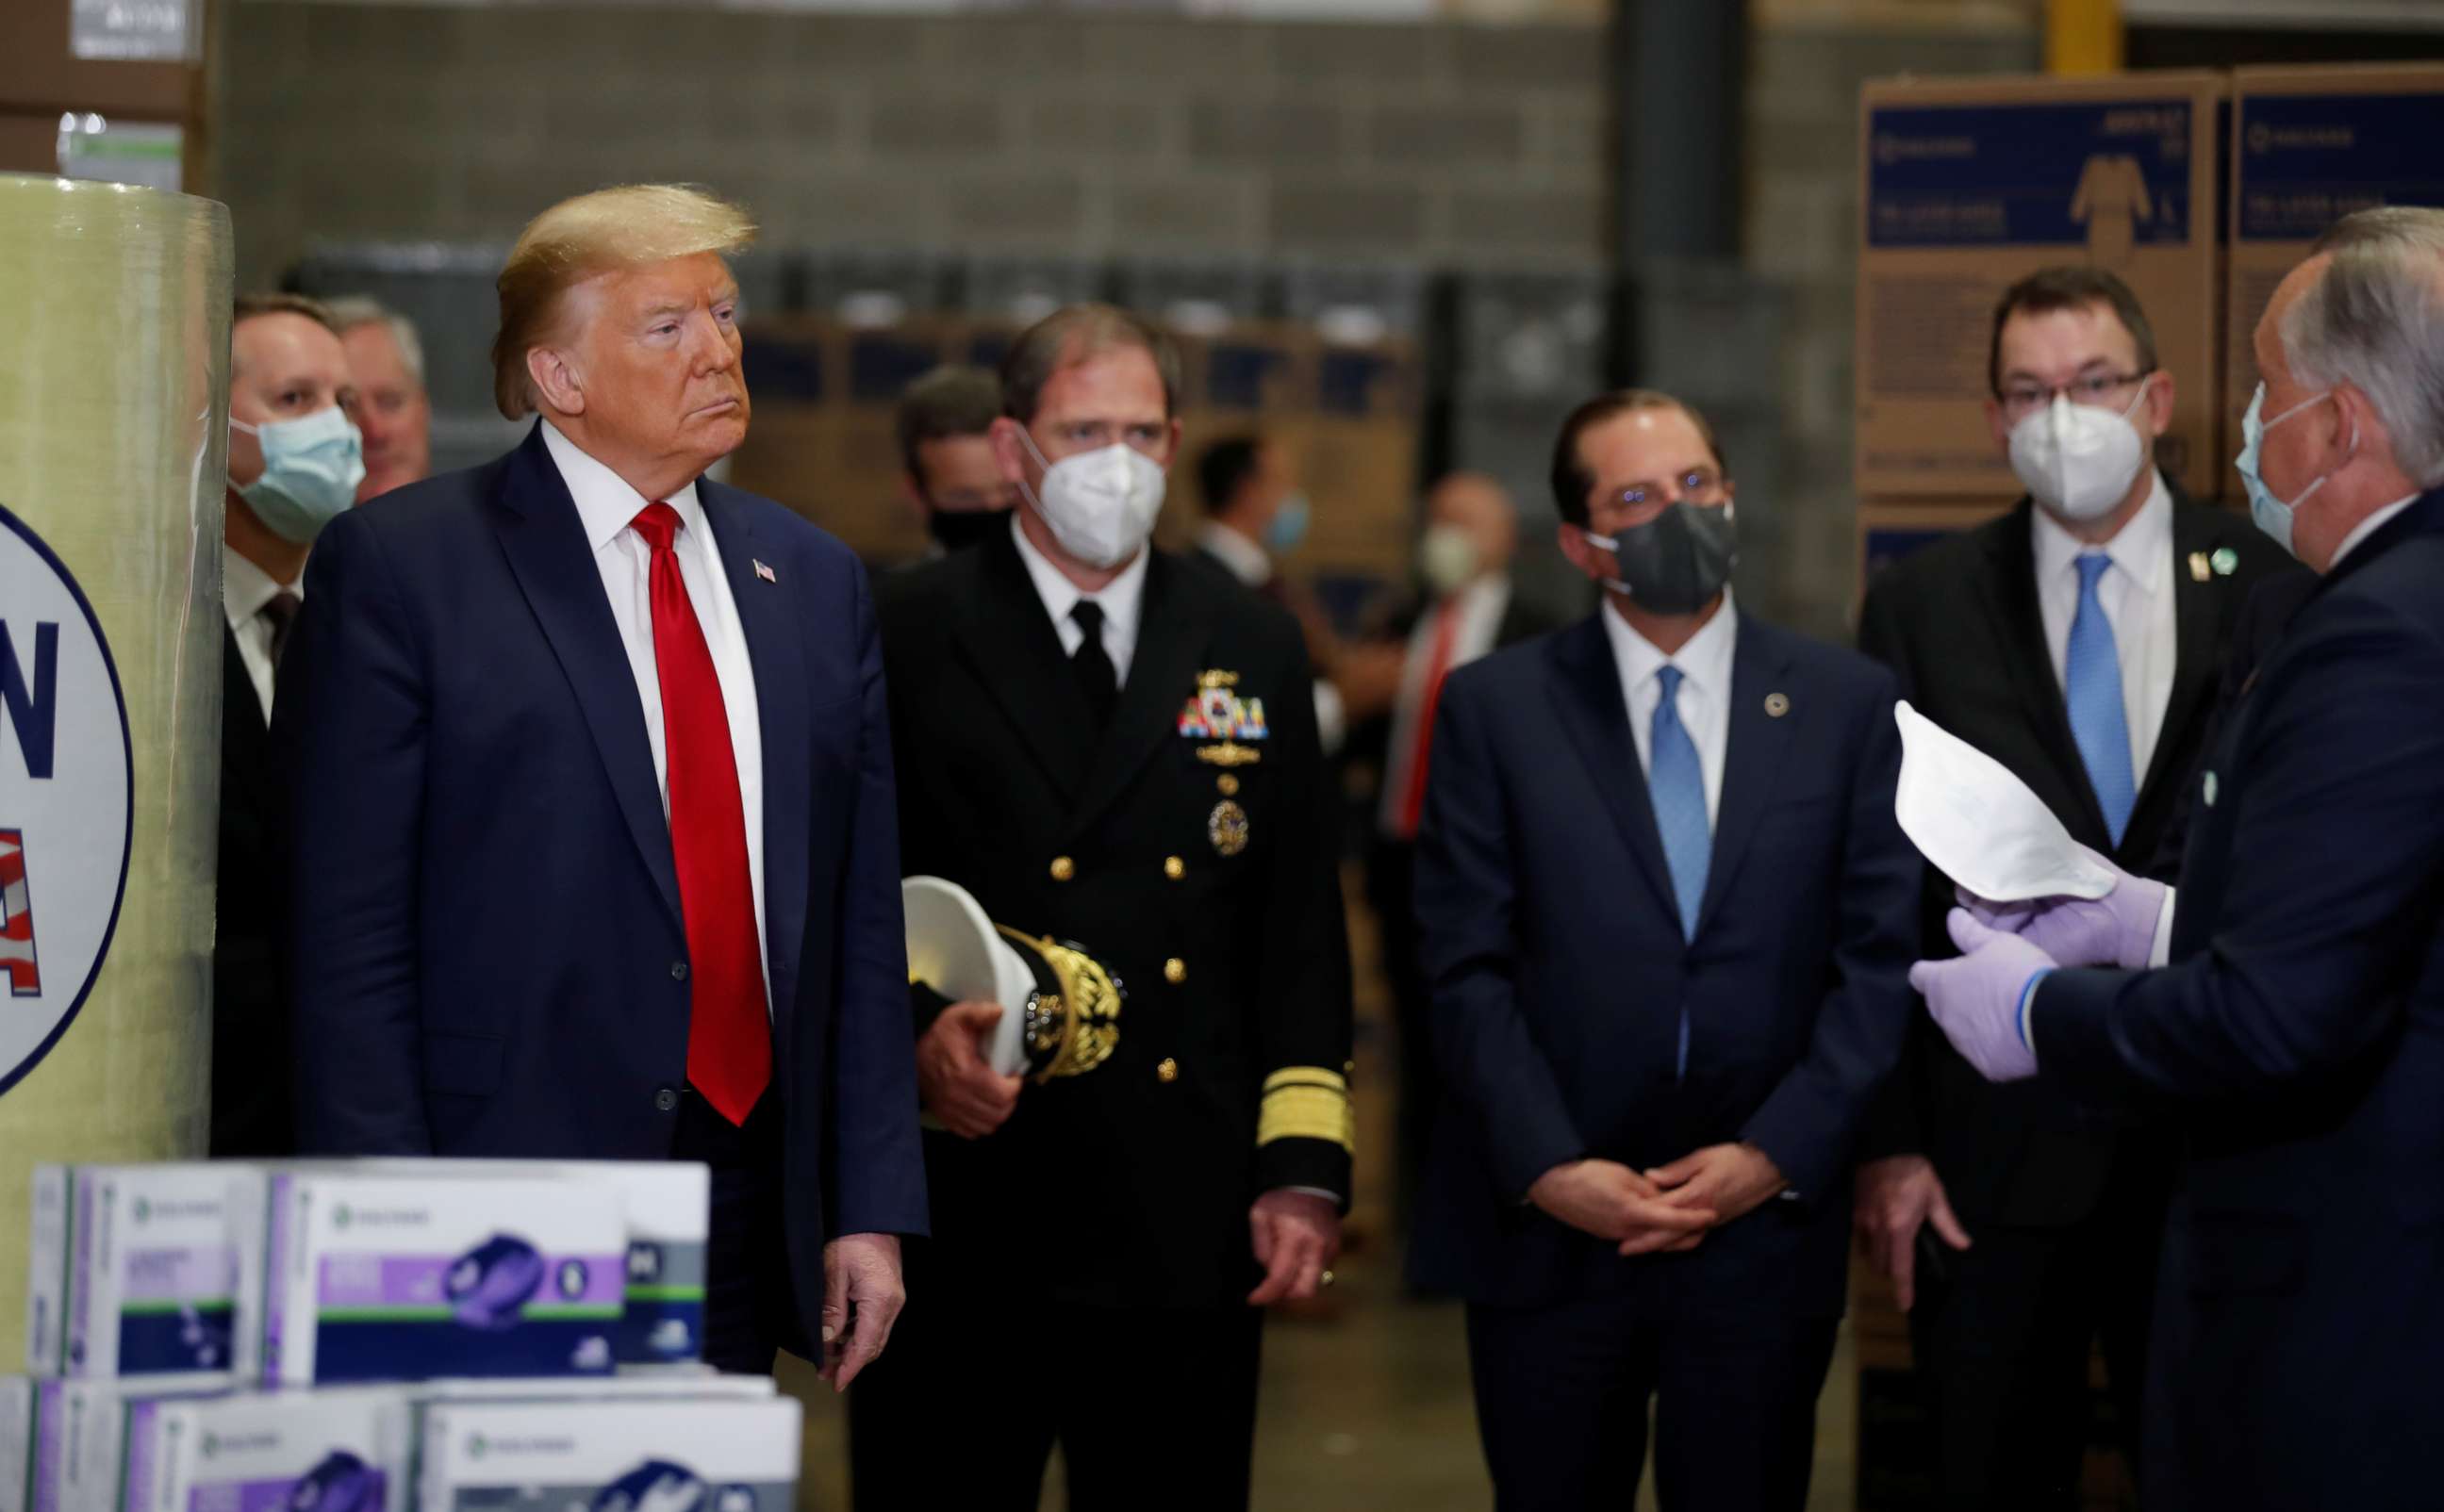 PHOTO: President Donald Trump tours medical equipment distributor Owens & Minor during the coronavirus disease pandemic in Allentown, Pa., May 14, 2020.